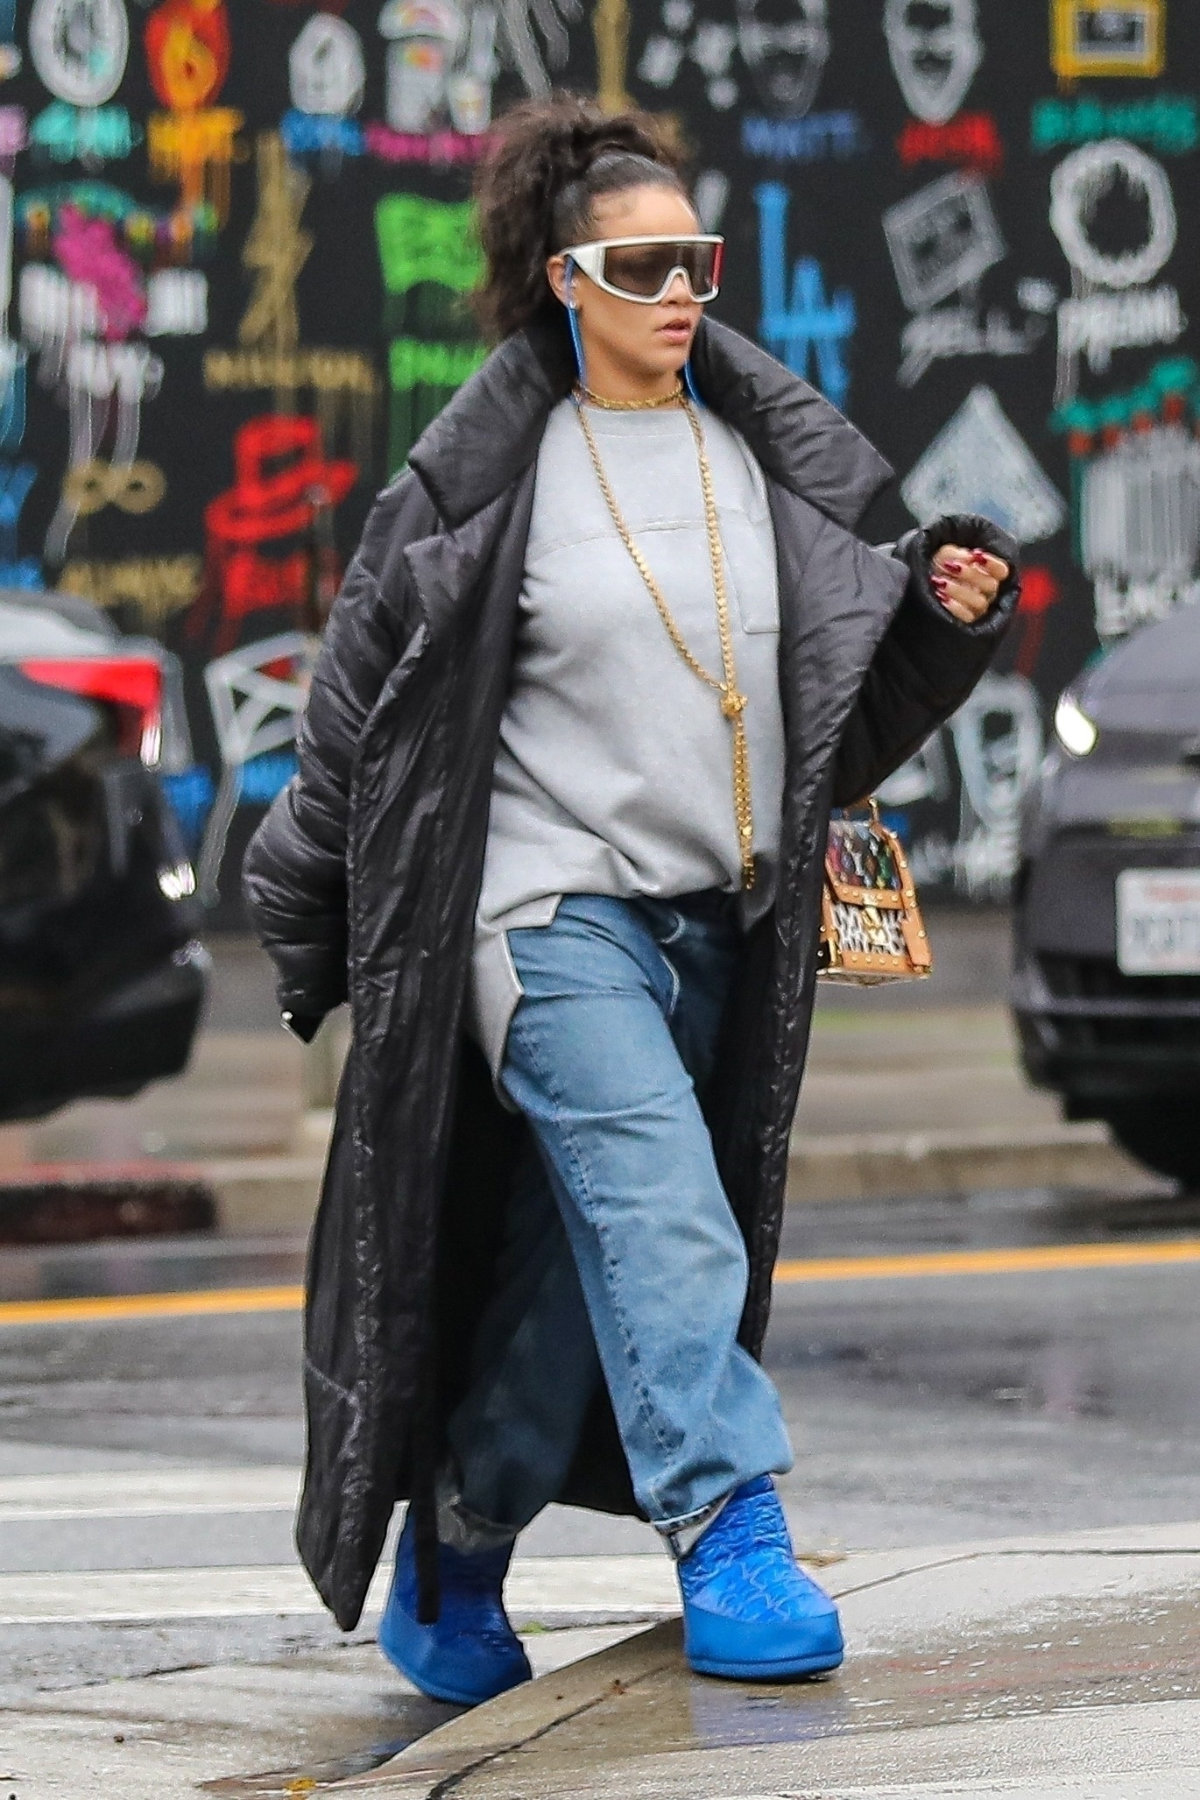 Rihanna Styles Out in Vault Moon Boots Vuitton